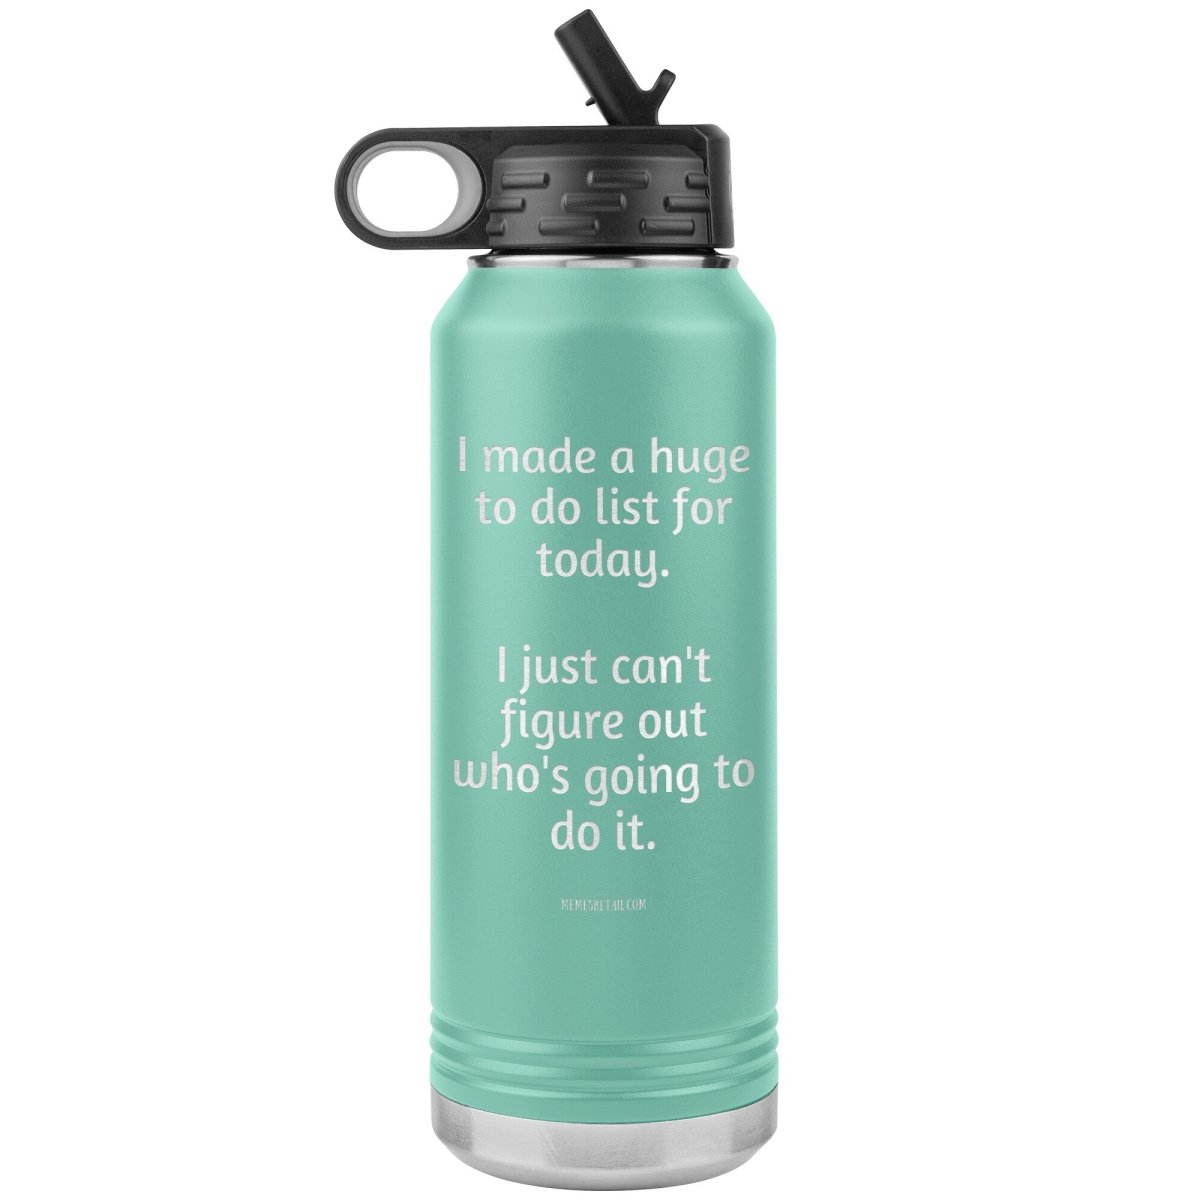 I made a huge to do list for today. I just can't figure out who's going to do it. 32 oz Water Tumbler, Teal - MemesRetail.com